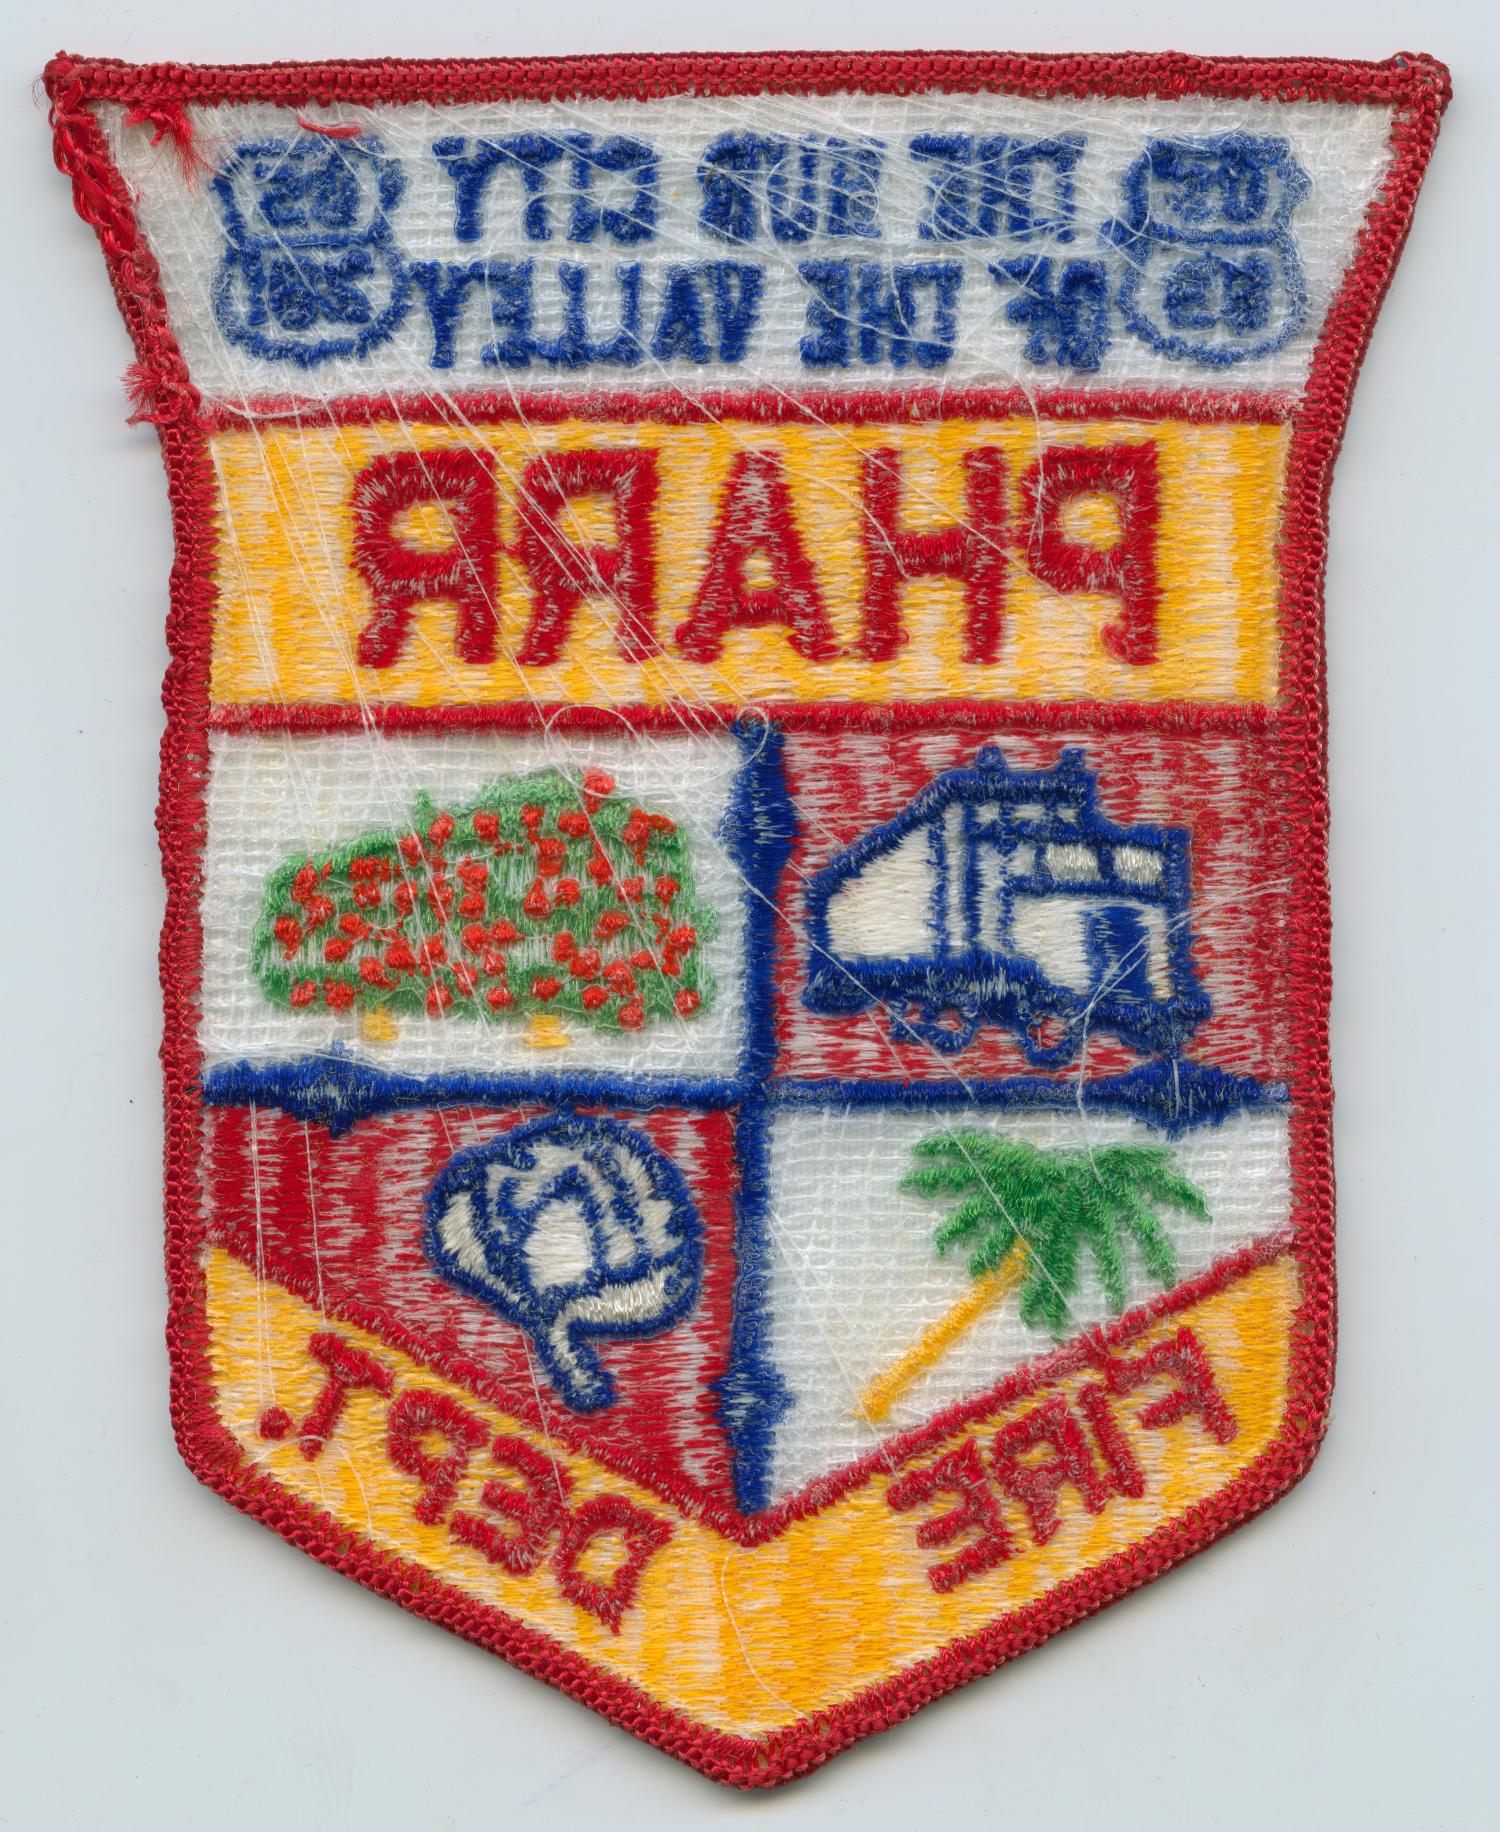 [Pharr, Texas Fire Department Patch]
                                                
                                                    [Sequence #]: 2 of 2
                                                